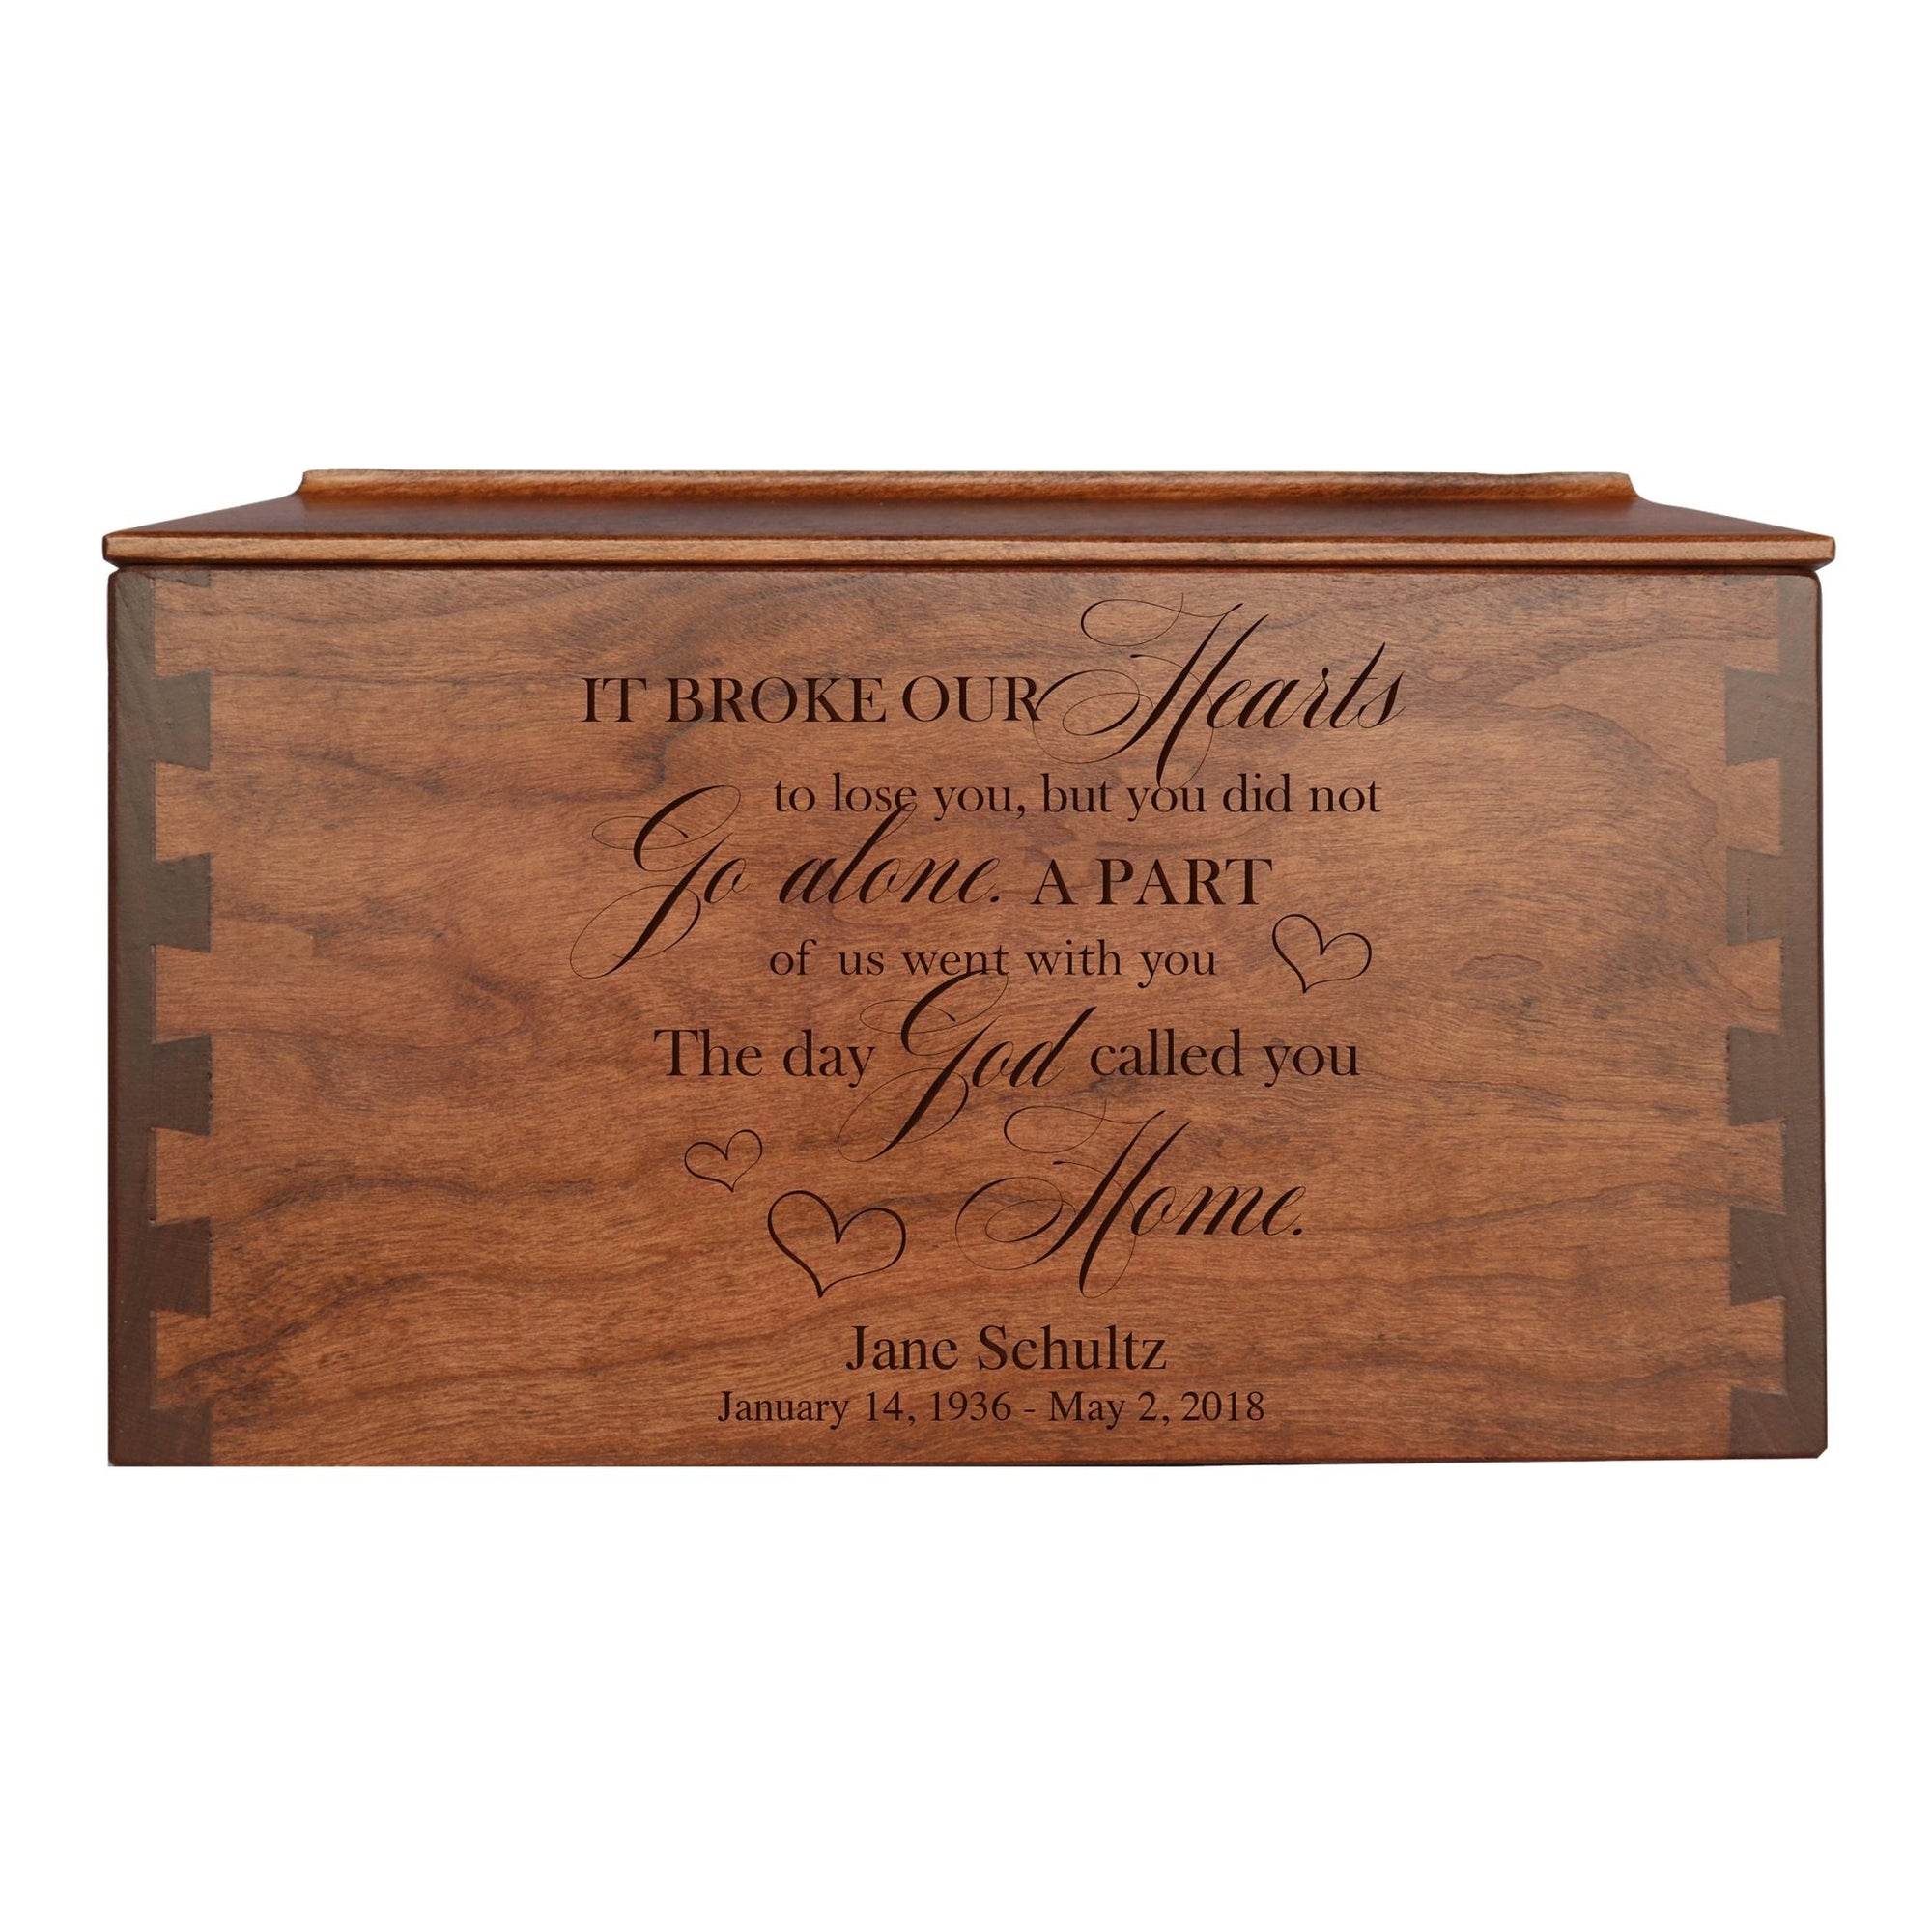 Custom Wooden Cremation Urn Box Large for Human Ashes holds 291 cu in It Broke Our Hearts 2 - LifeSong Milestones